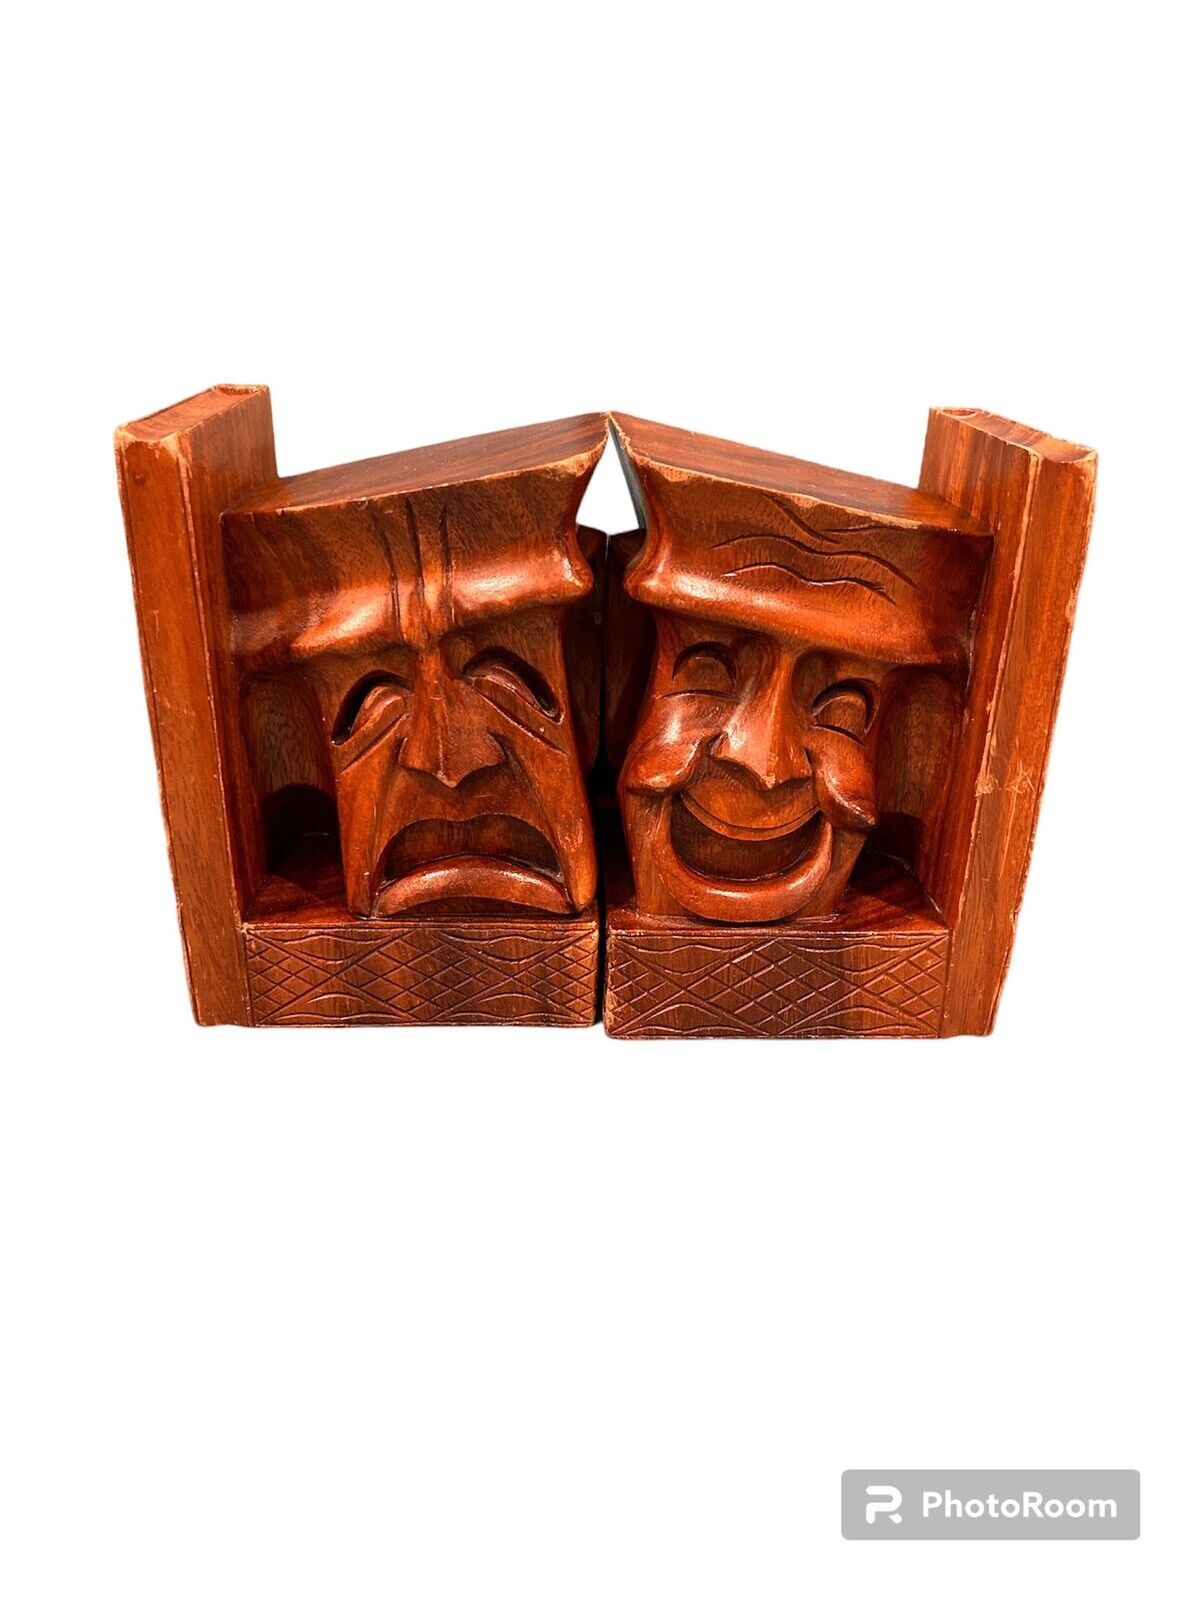 Vintage Comedy and Tragedy wooden bookends from 1960’s  drama face bookends